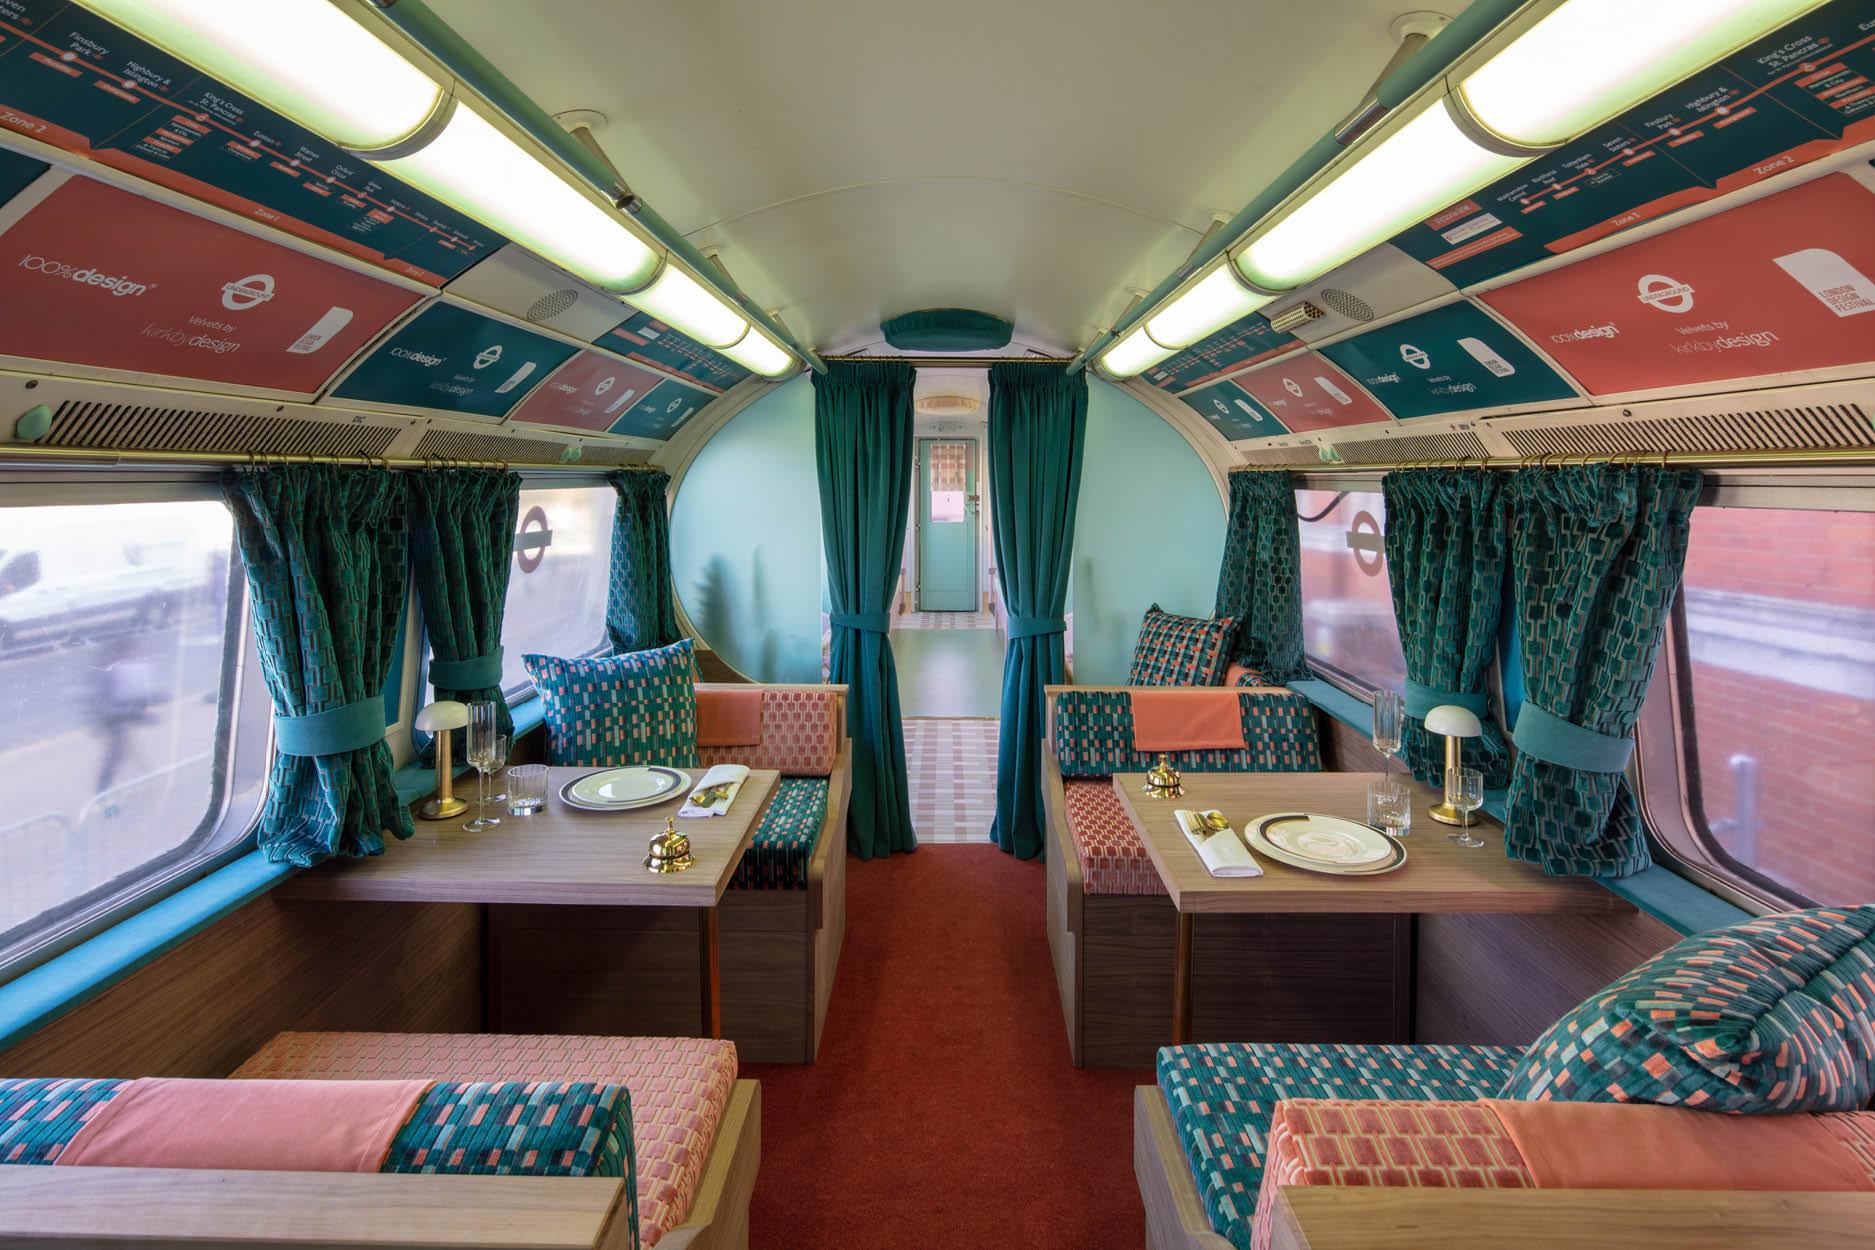 A 1967 London Underground Carriage is Livened Up by Dreamy Fabric Designs